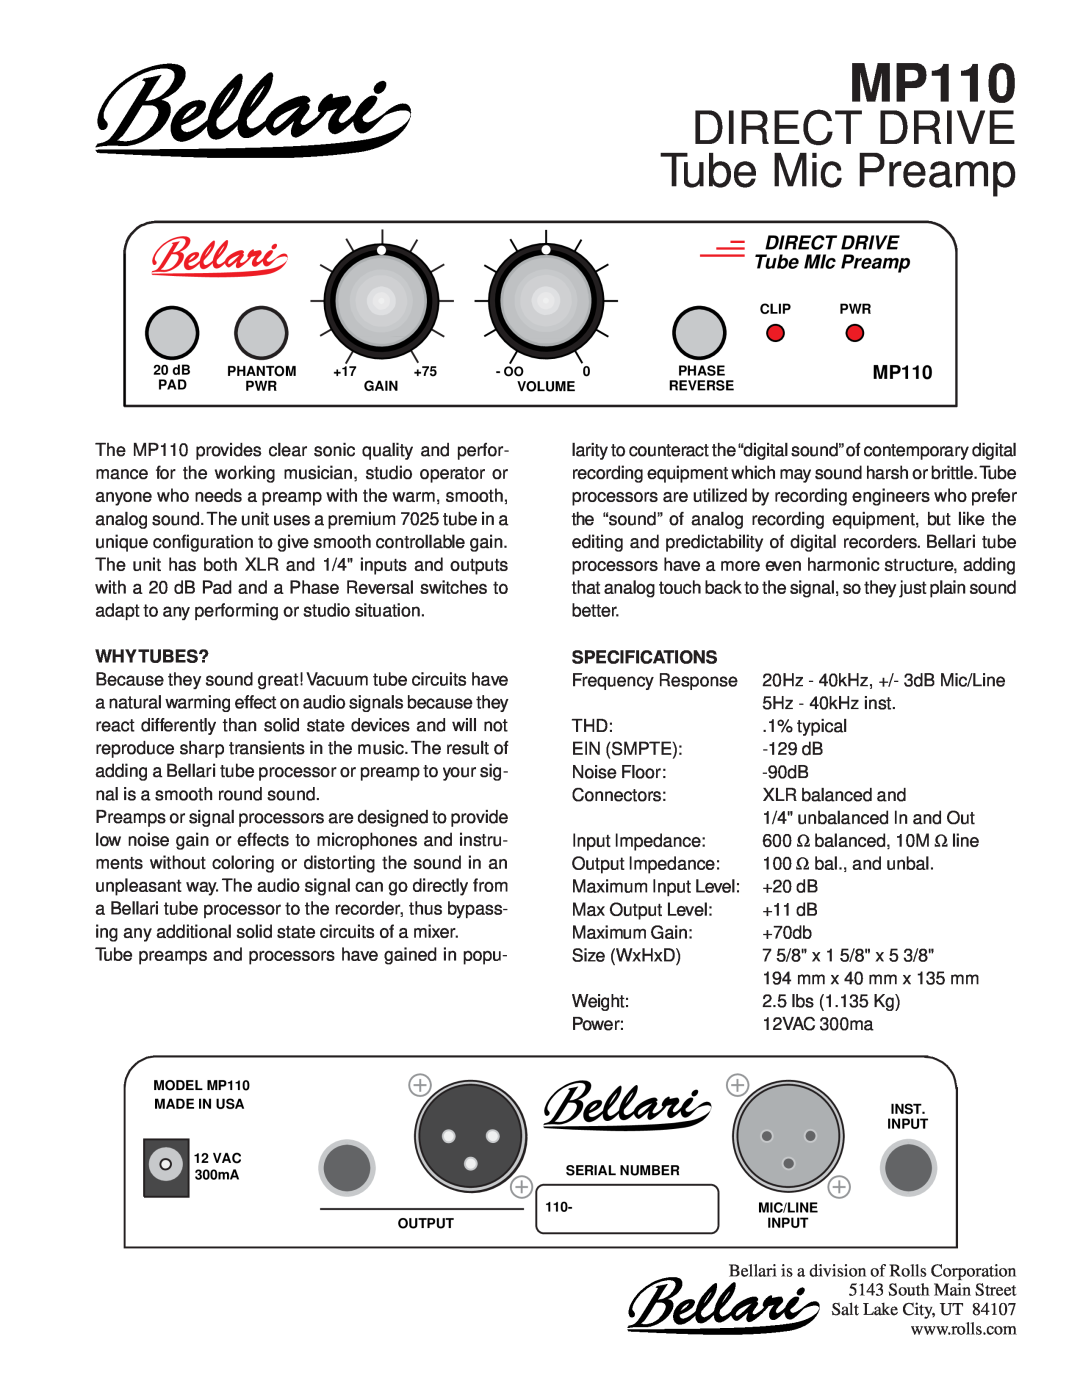 Rolls MP110 specifications DIRECT DRIVE Tube Mic Preamp, Direct Drive, Tube MIc Preamp, Why Tubes?, Specifications 